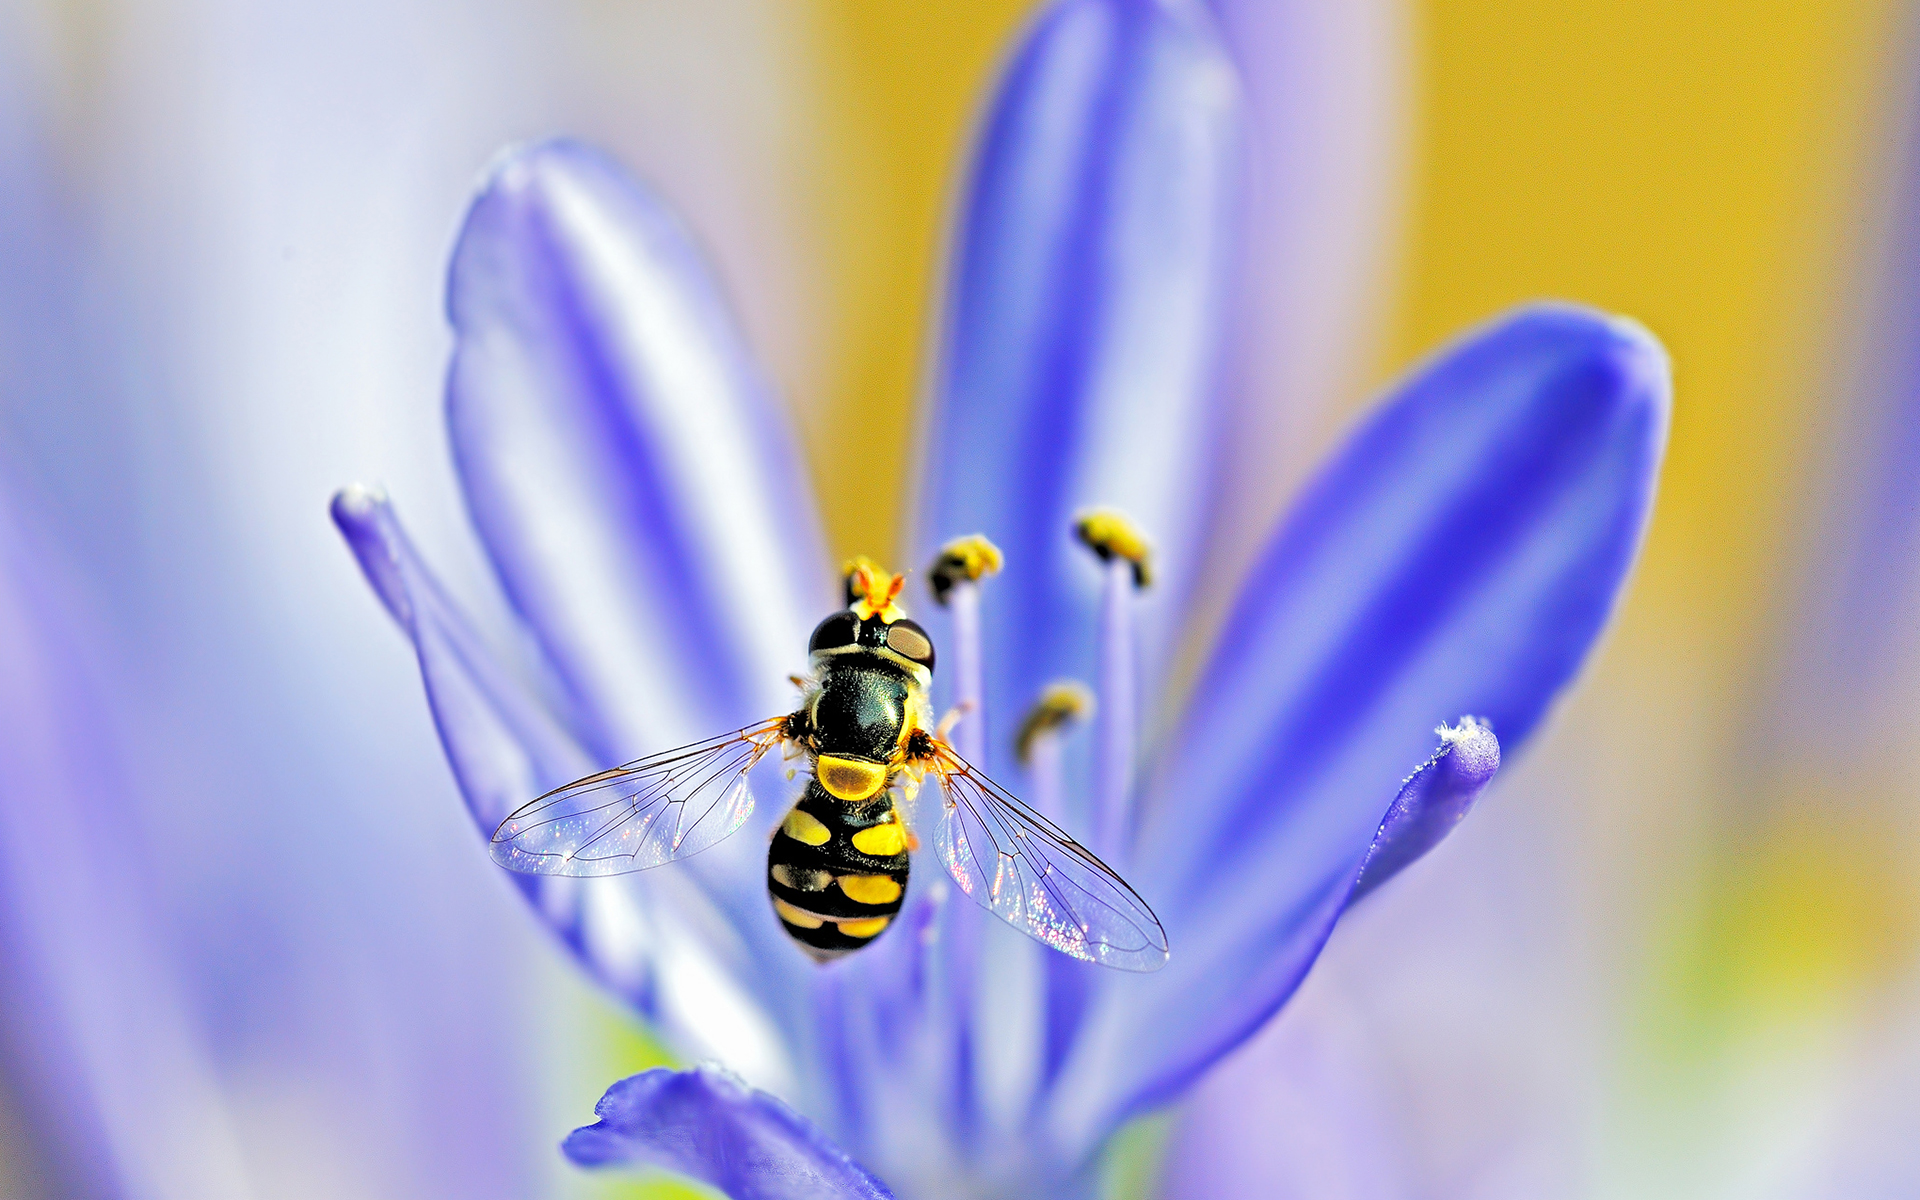 Hoverfly agapanthus flower